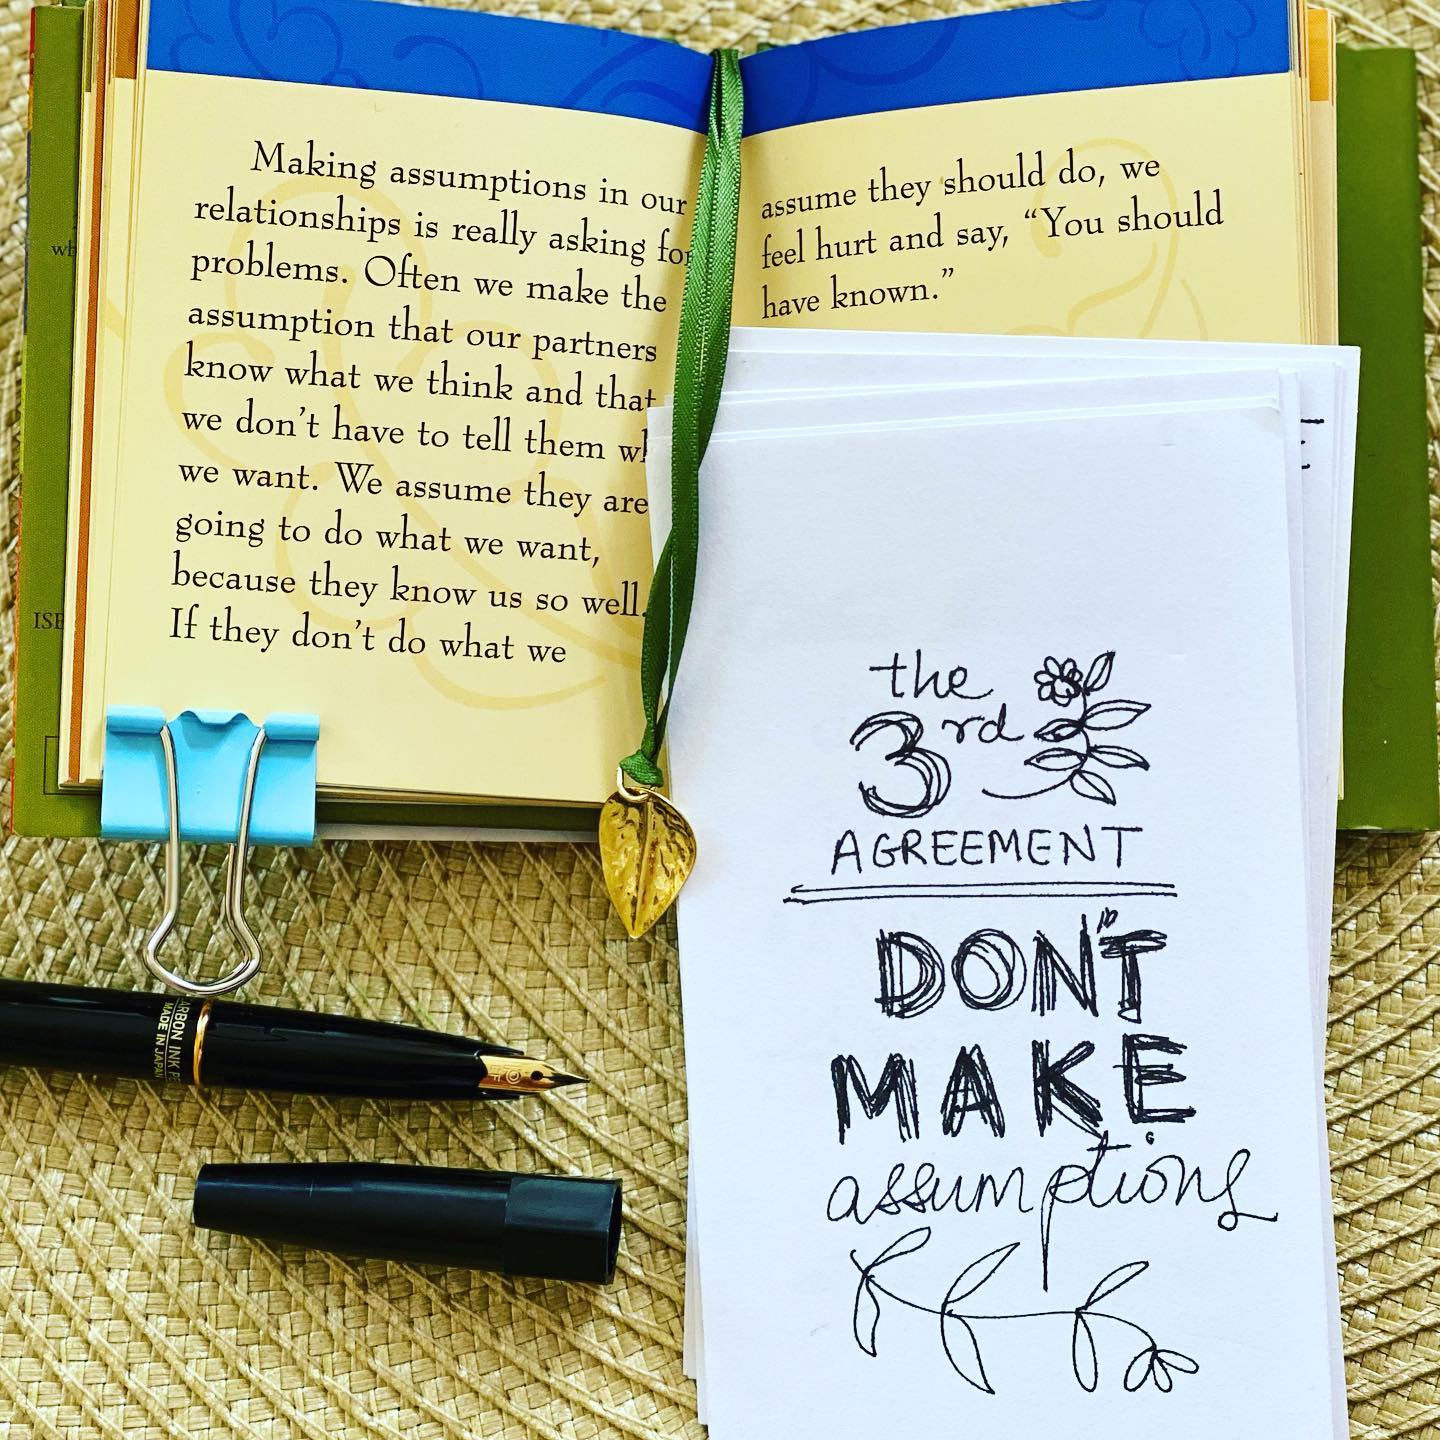 This tiny book of wisdom of the ‘Four Agreements’ by Don Miguel Ruiz is so full of deep insights that always serve as a ready reckoner!